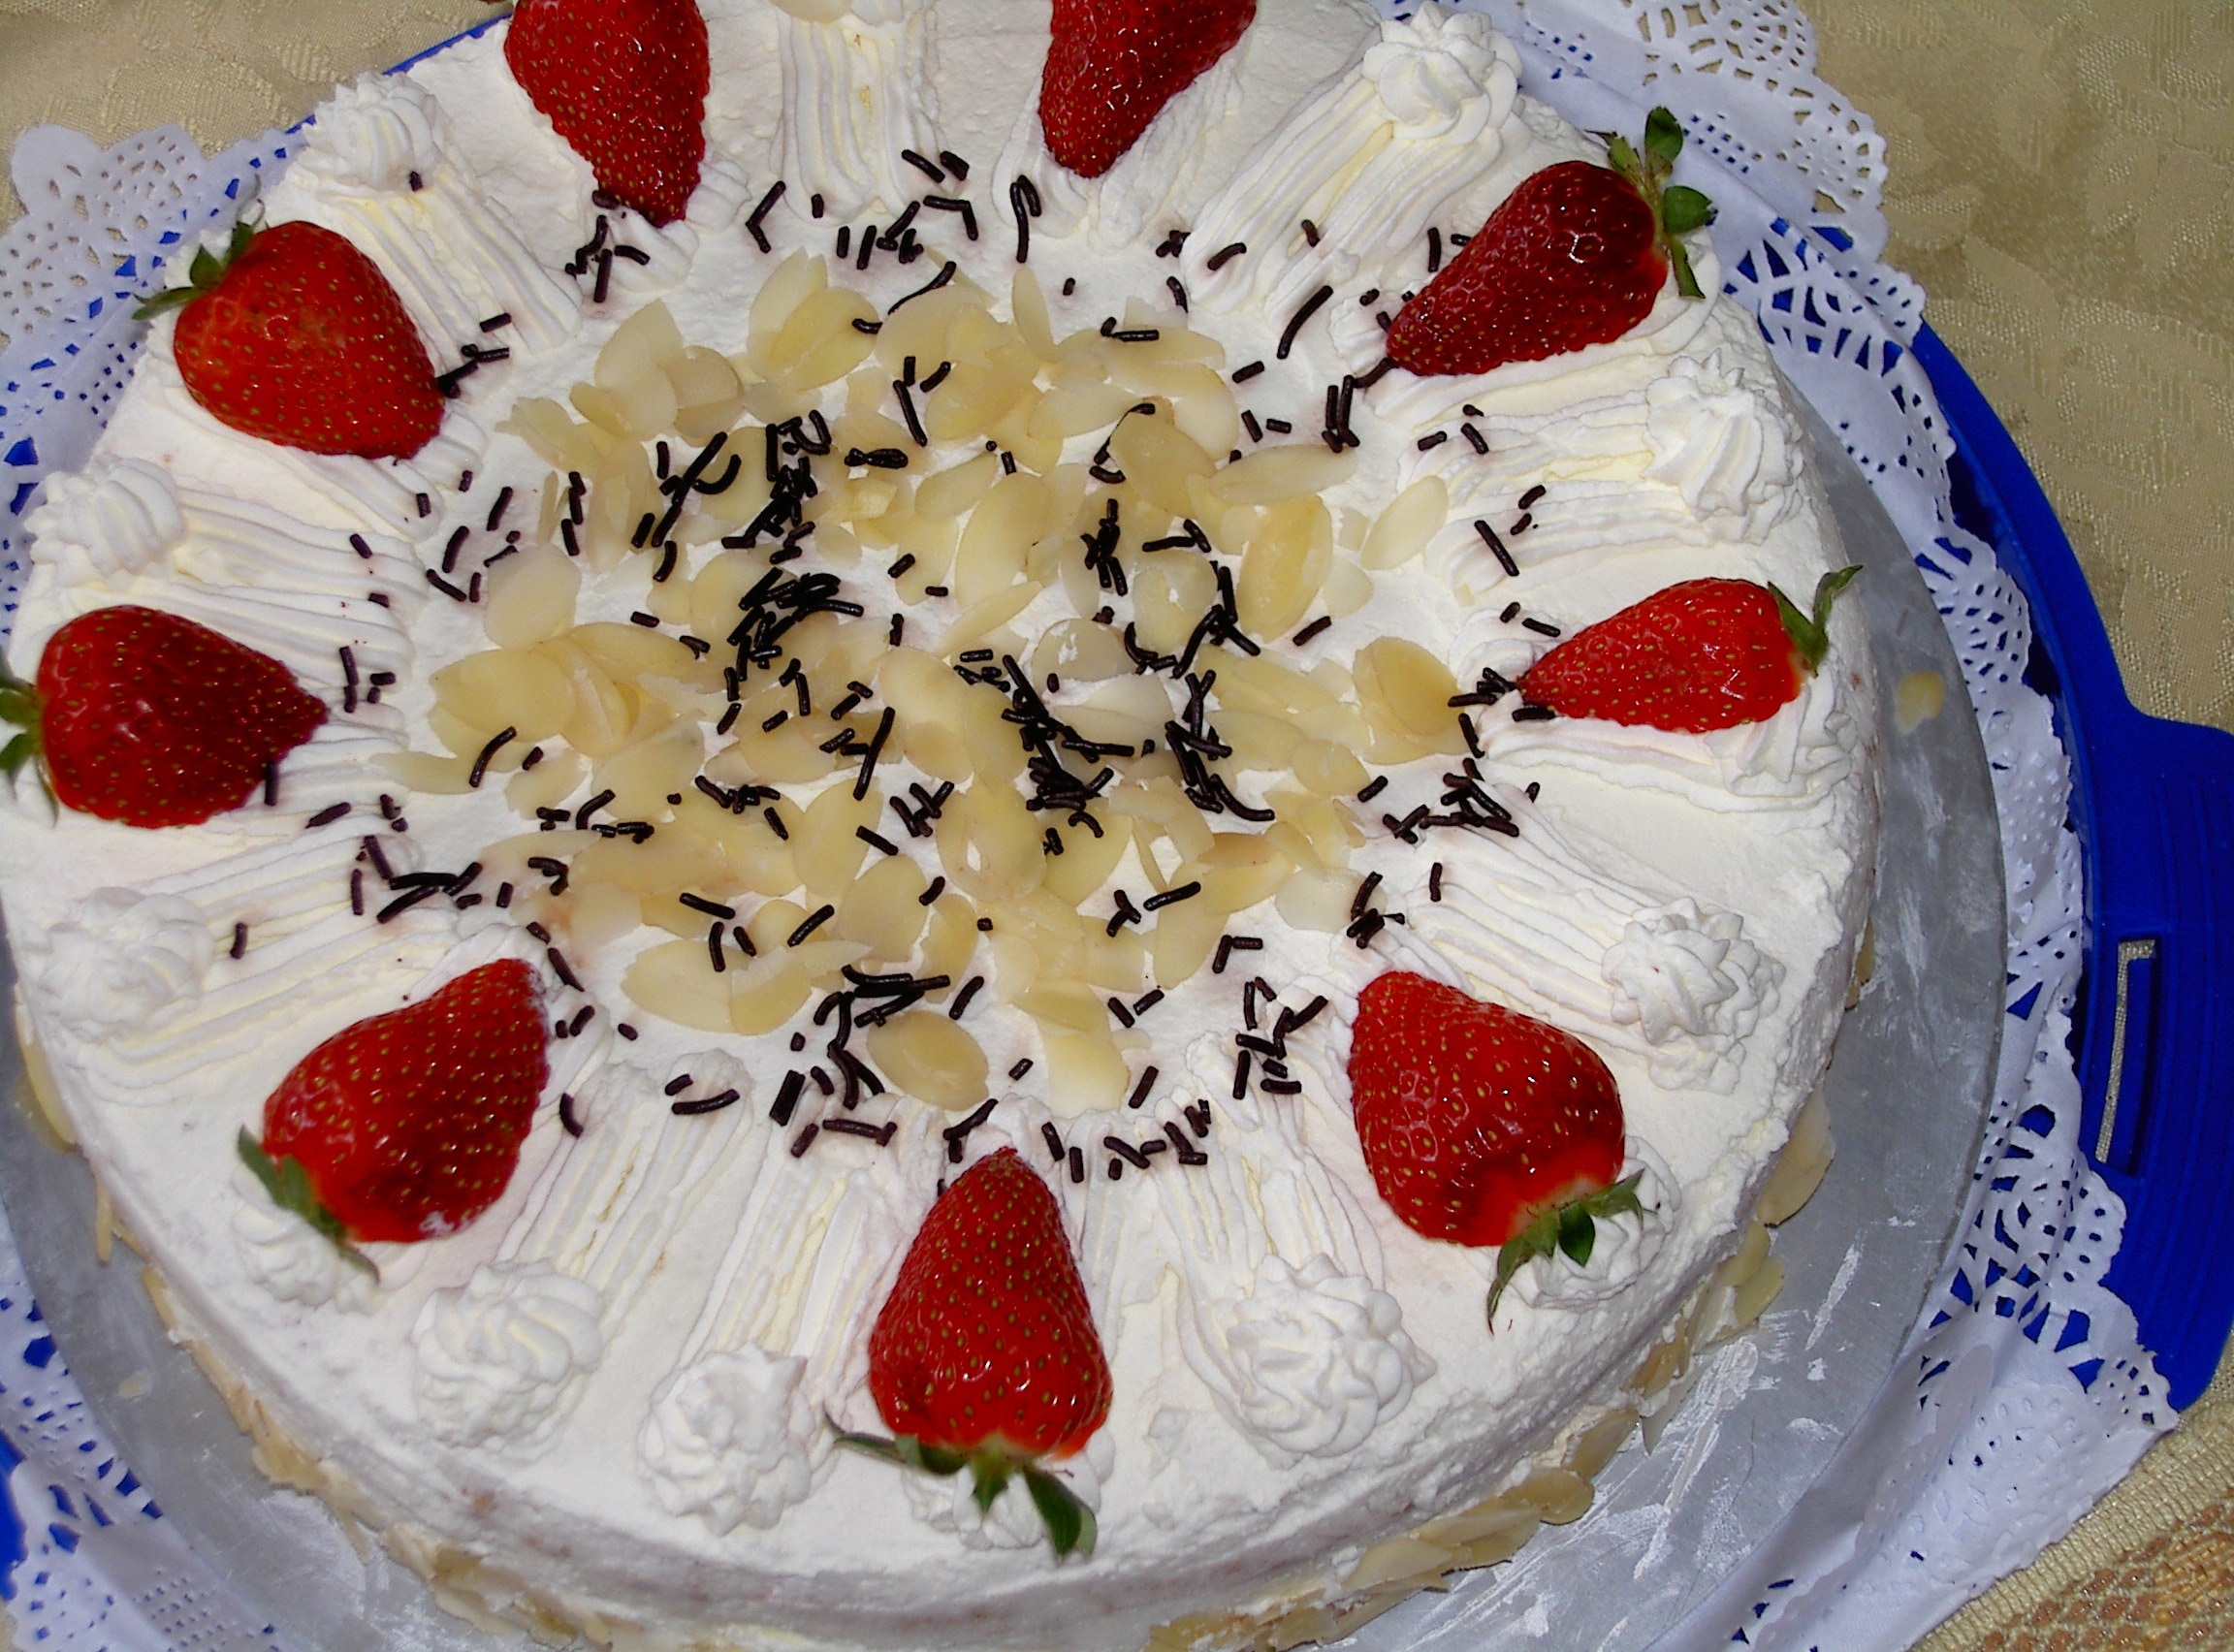 white and red frosted cake